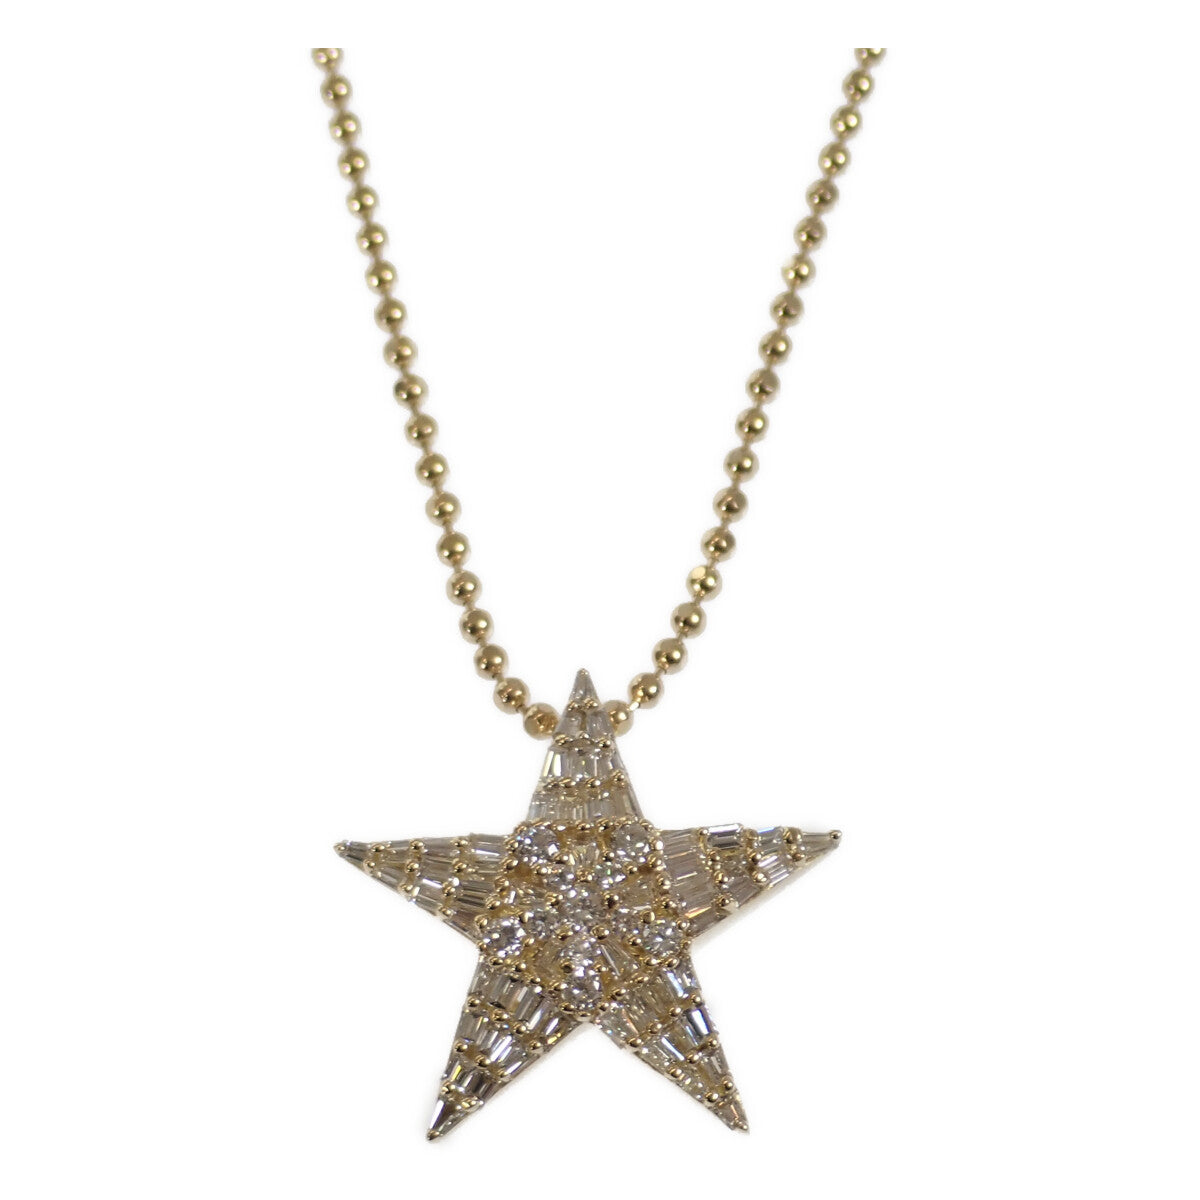 Ladies' K18YG Star Design Jewelry Necklace with Diamond (1.10ct) in Gold – Used